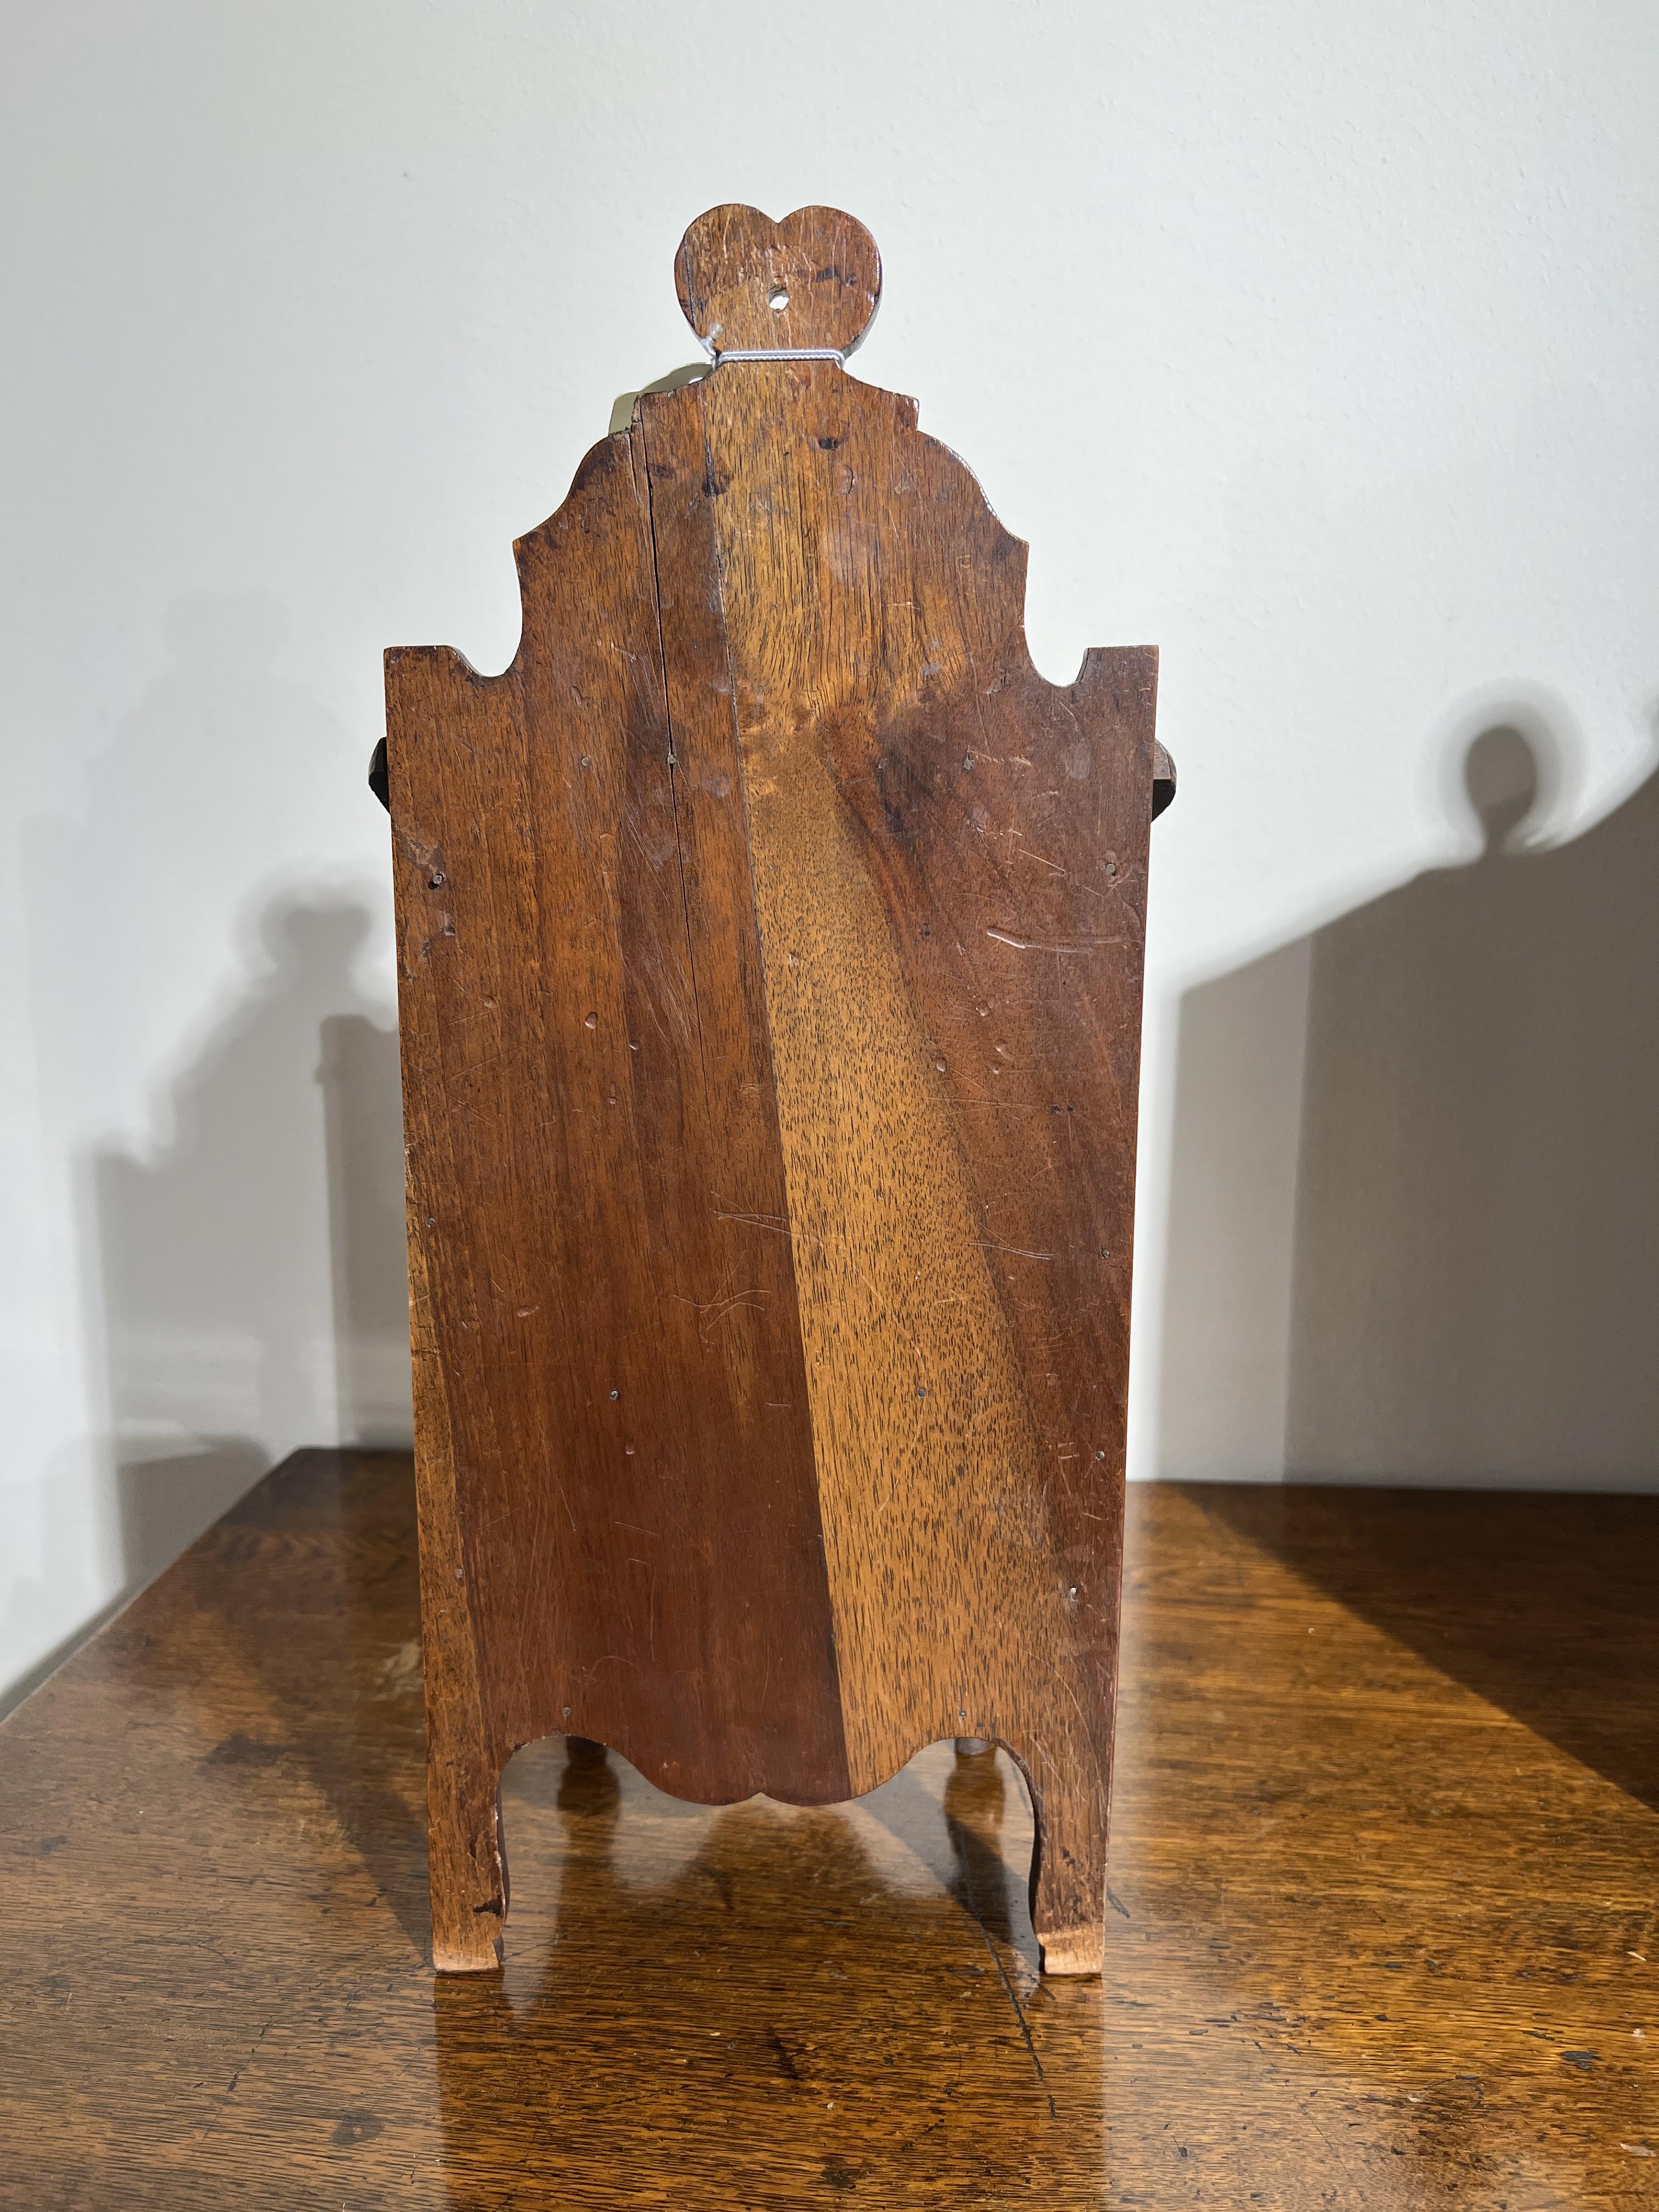 A FRENCH PROVINCIAL WALNUT CANDLE BOX LATE 18TH / EARLY 19TH CENTURYwith a sliding cover and - Image 4 of 18